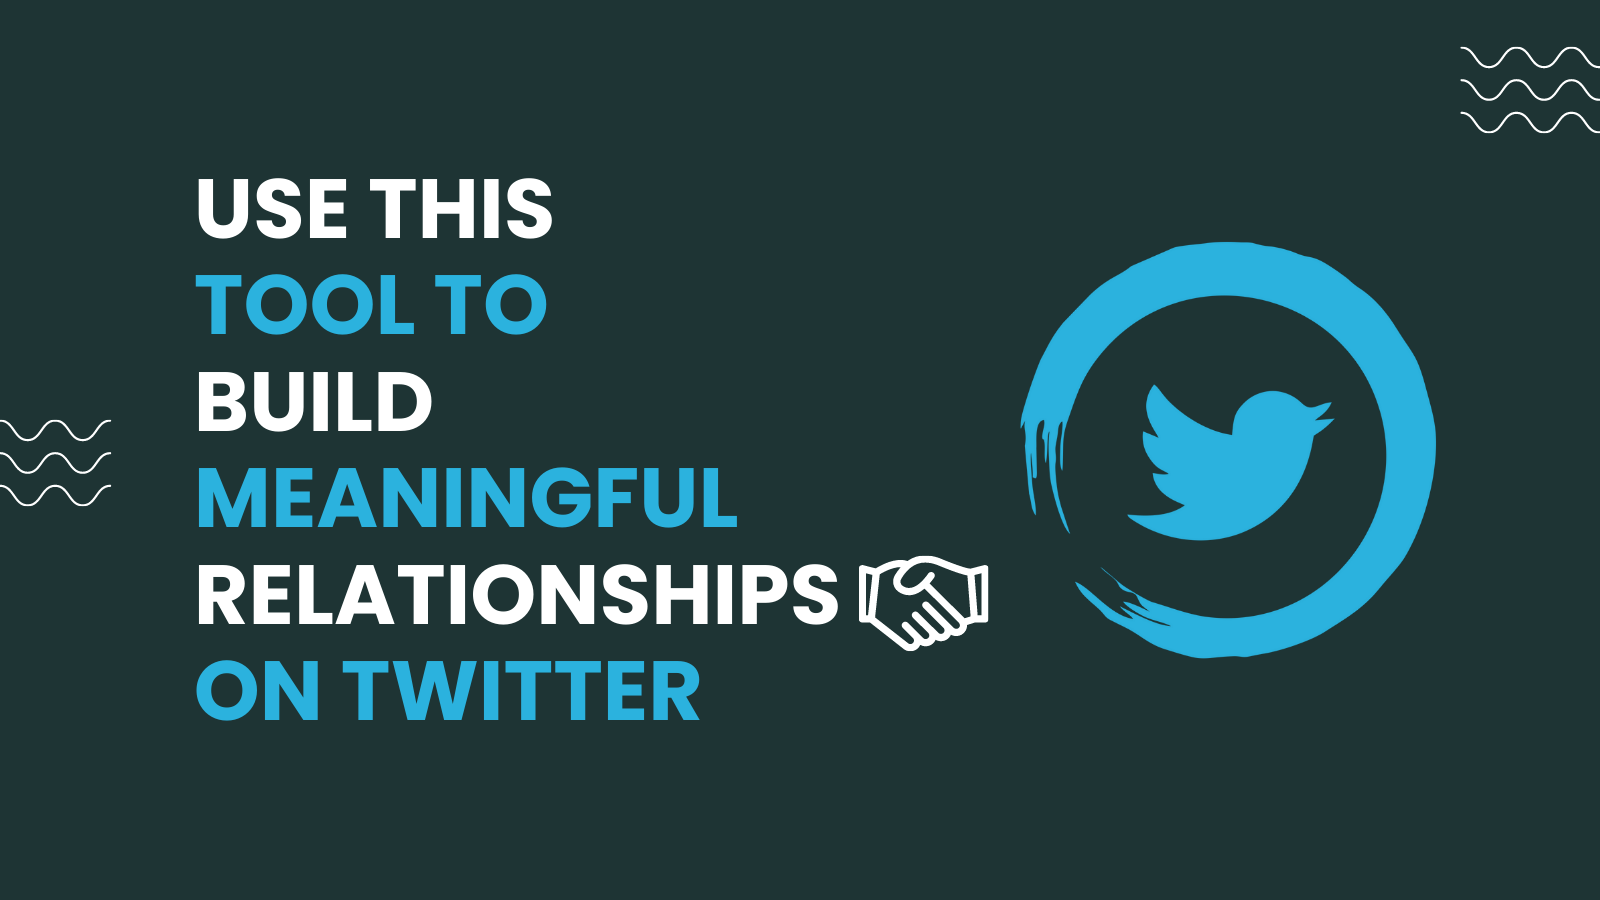 How to build meaningful relationships on Twitter without distracting from main job